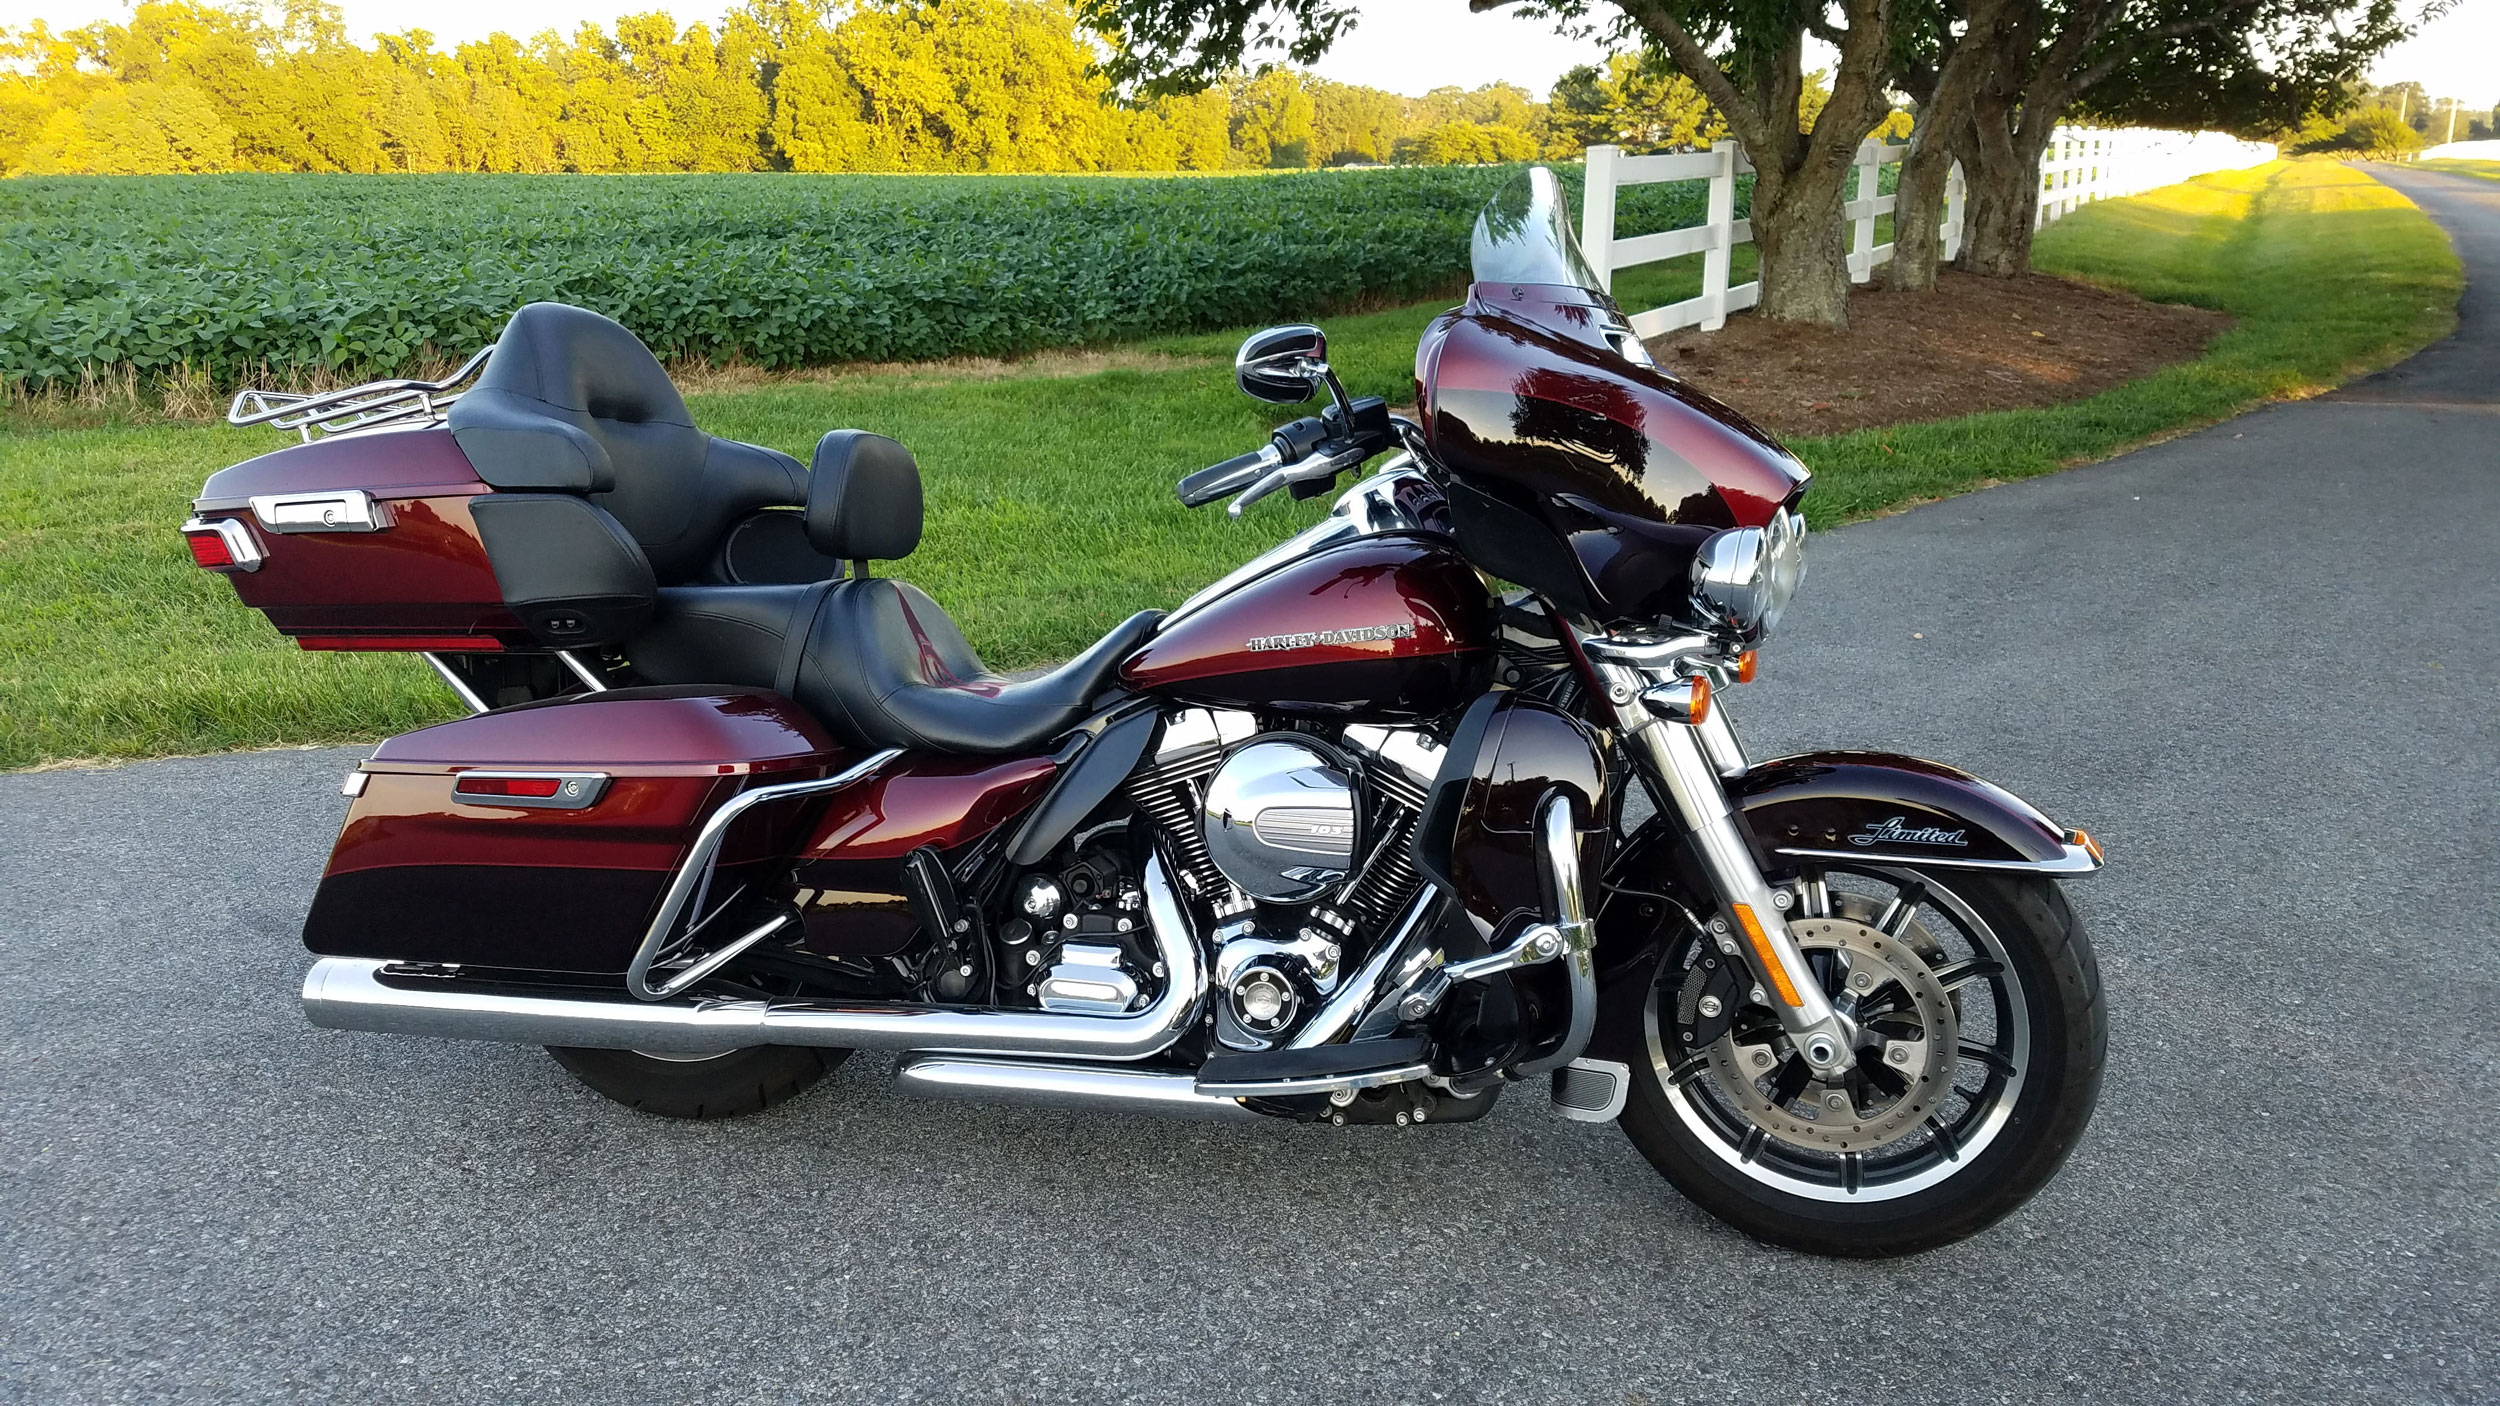 Mean City Cycle seat pics? - Harley Davidson Forums